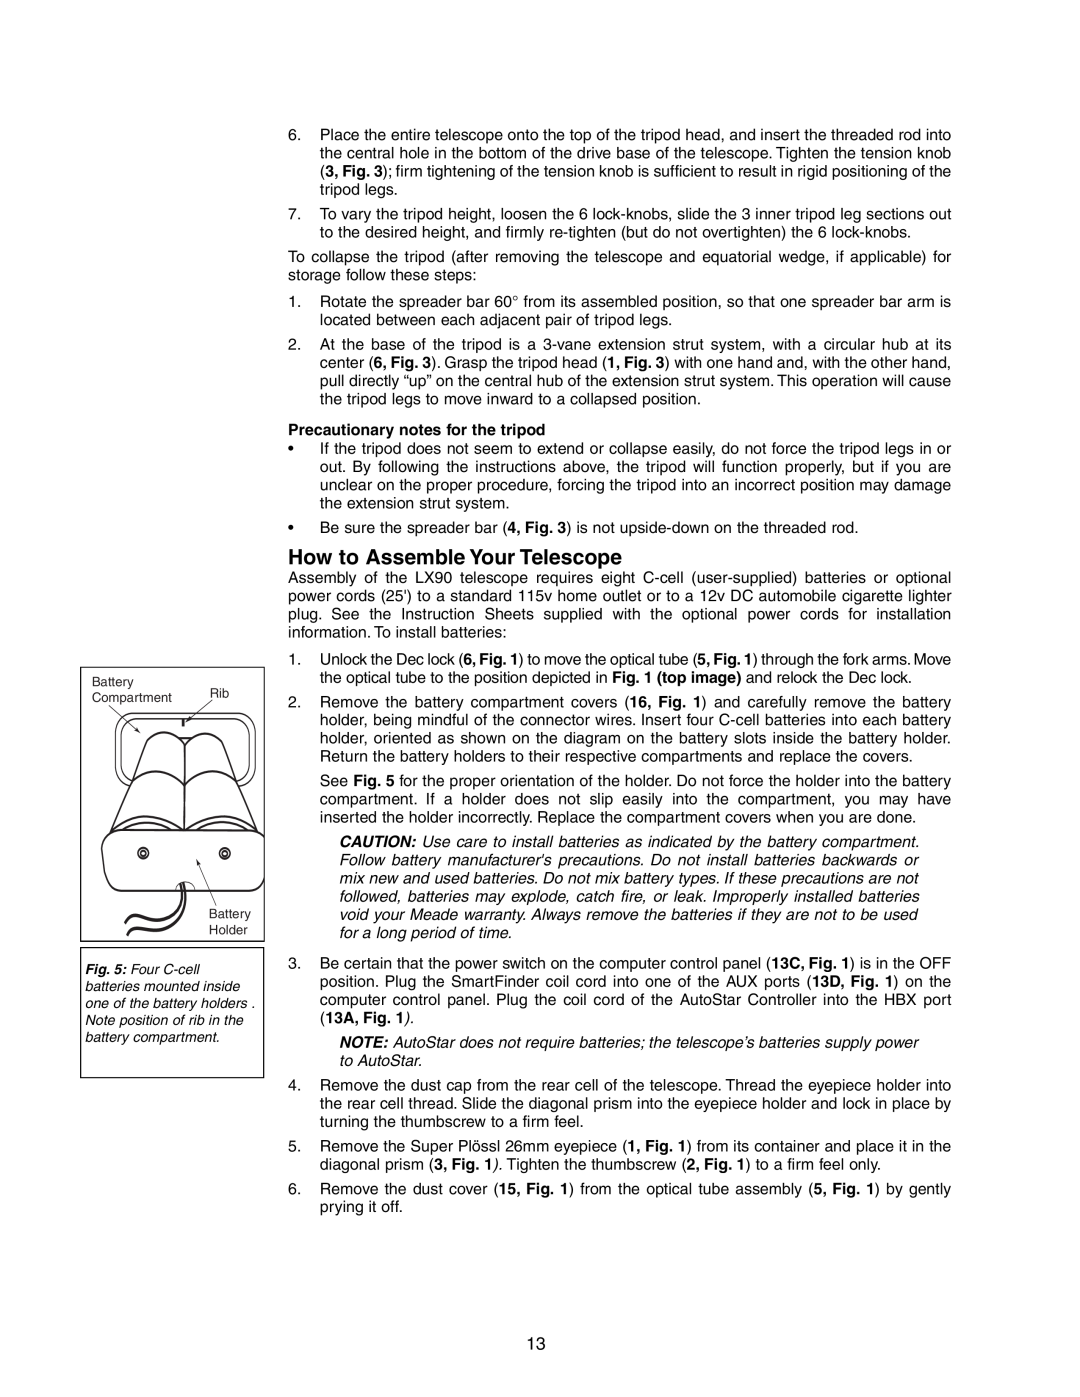 Meade LX90GPS instruction manual How to Assemble Your Telescope, Precautionary notes for the tripod 